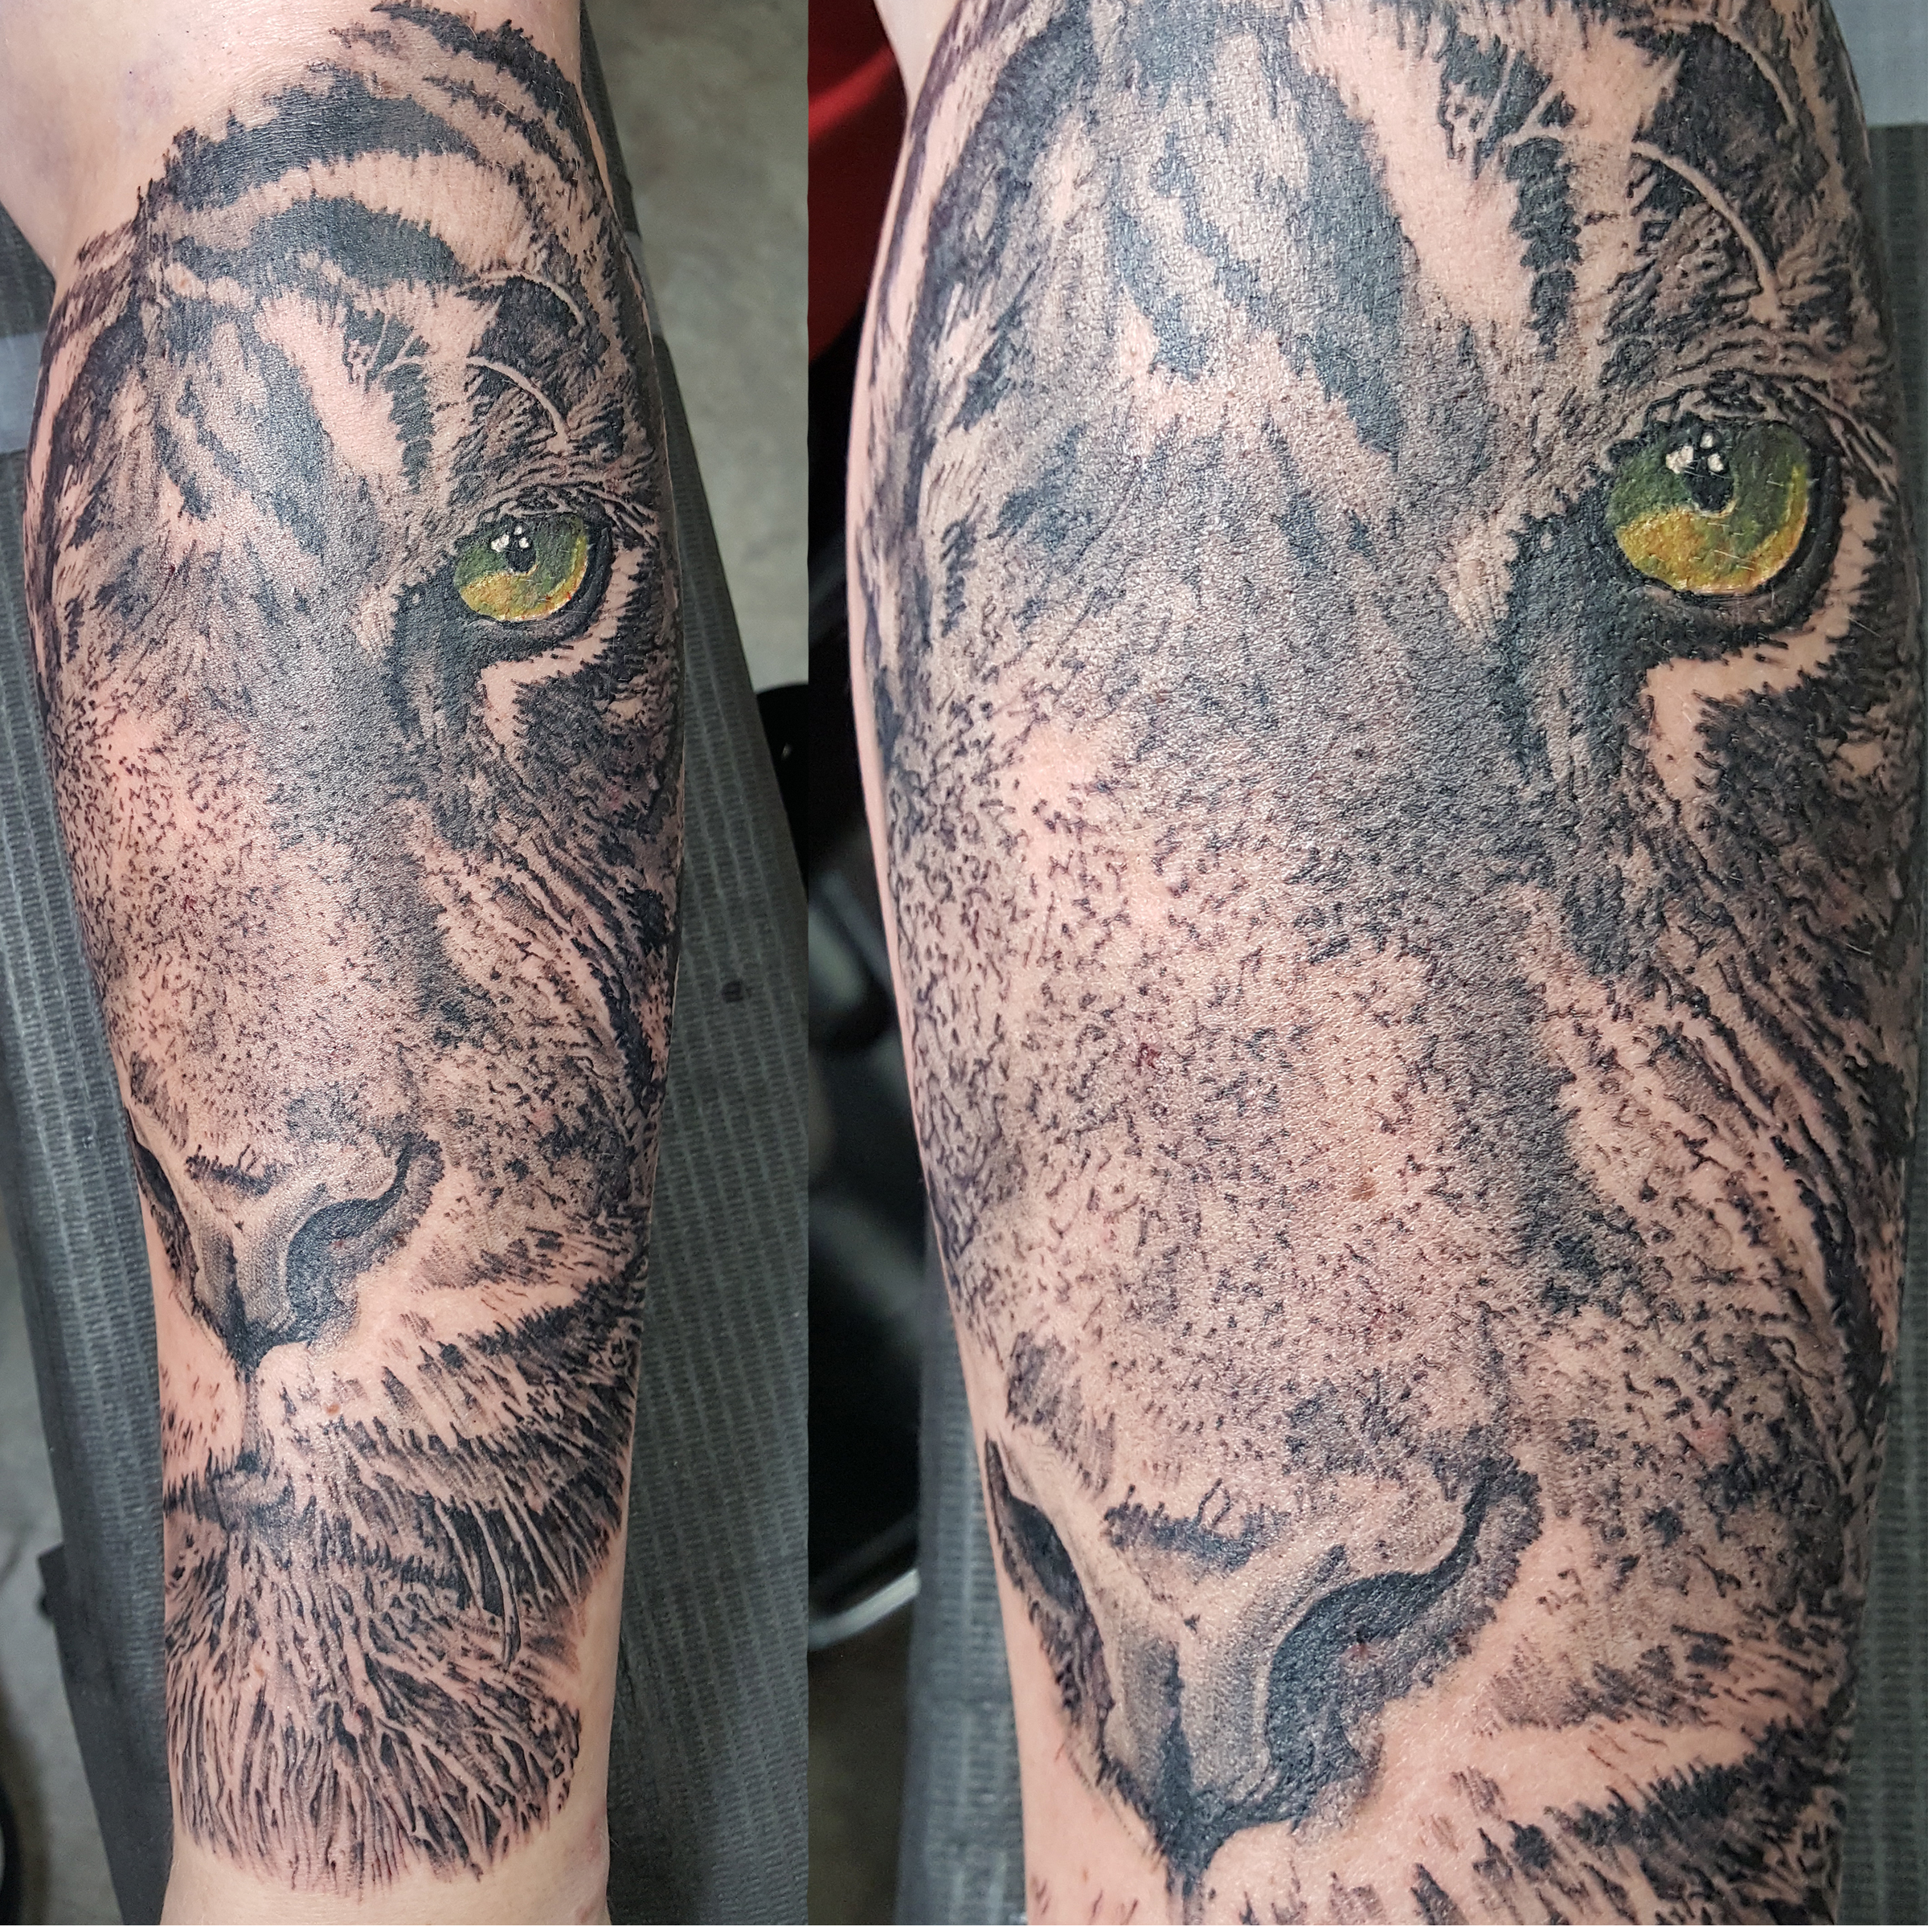 Tiger face with realistic tattooed fur adn colored eye.  Work of this scale is awesome.